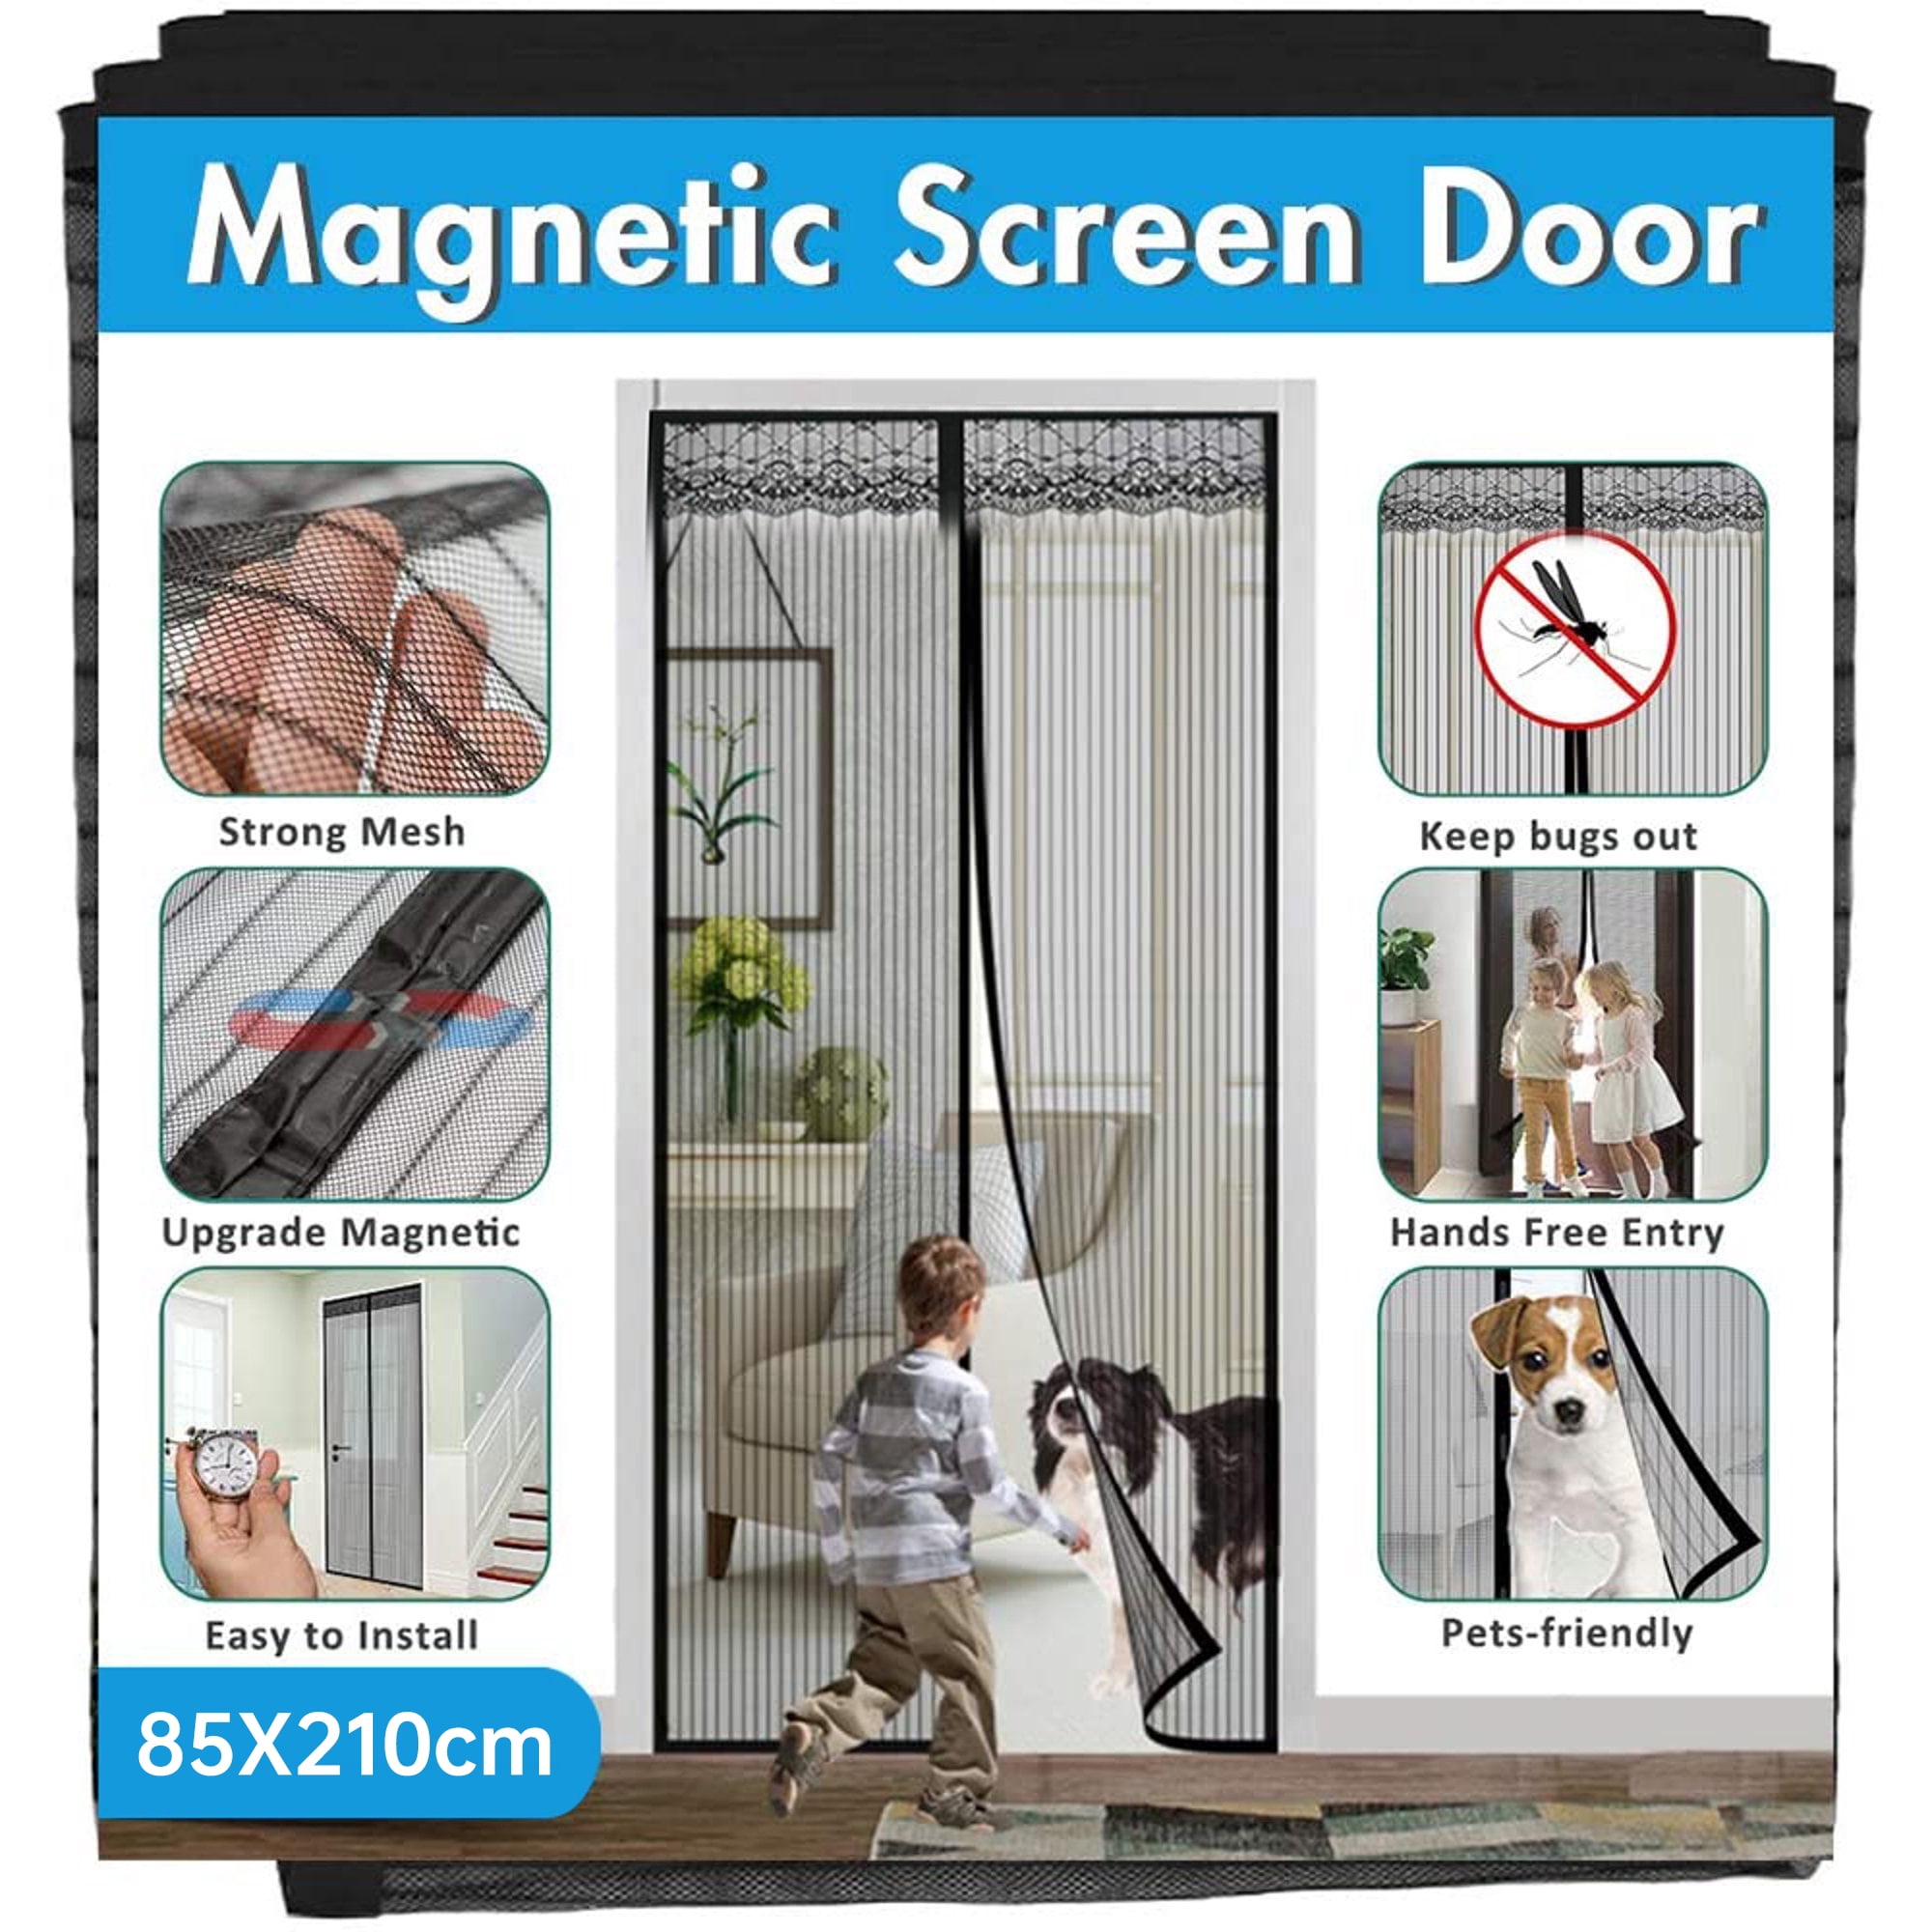 Magnetic Screen Door Mesh Curtain Full Frame Velcro Hand Free Close Open Bugs Up 